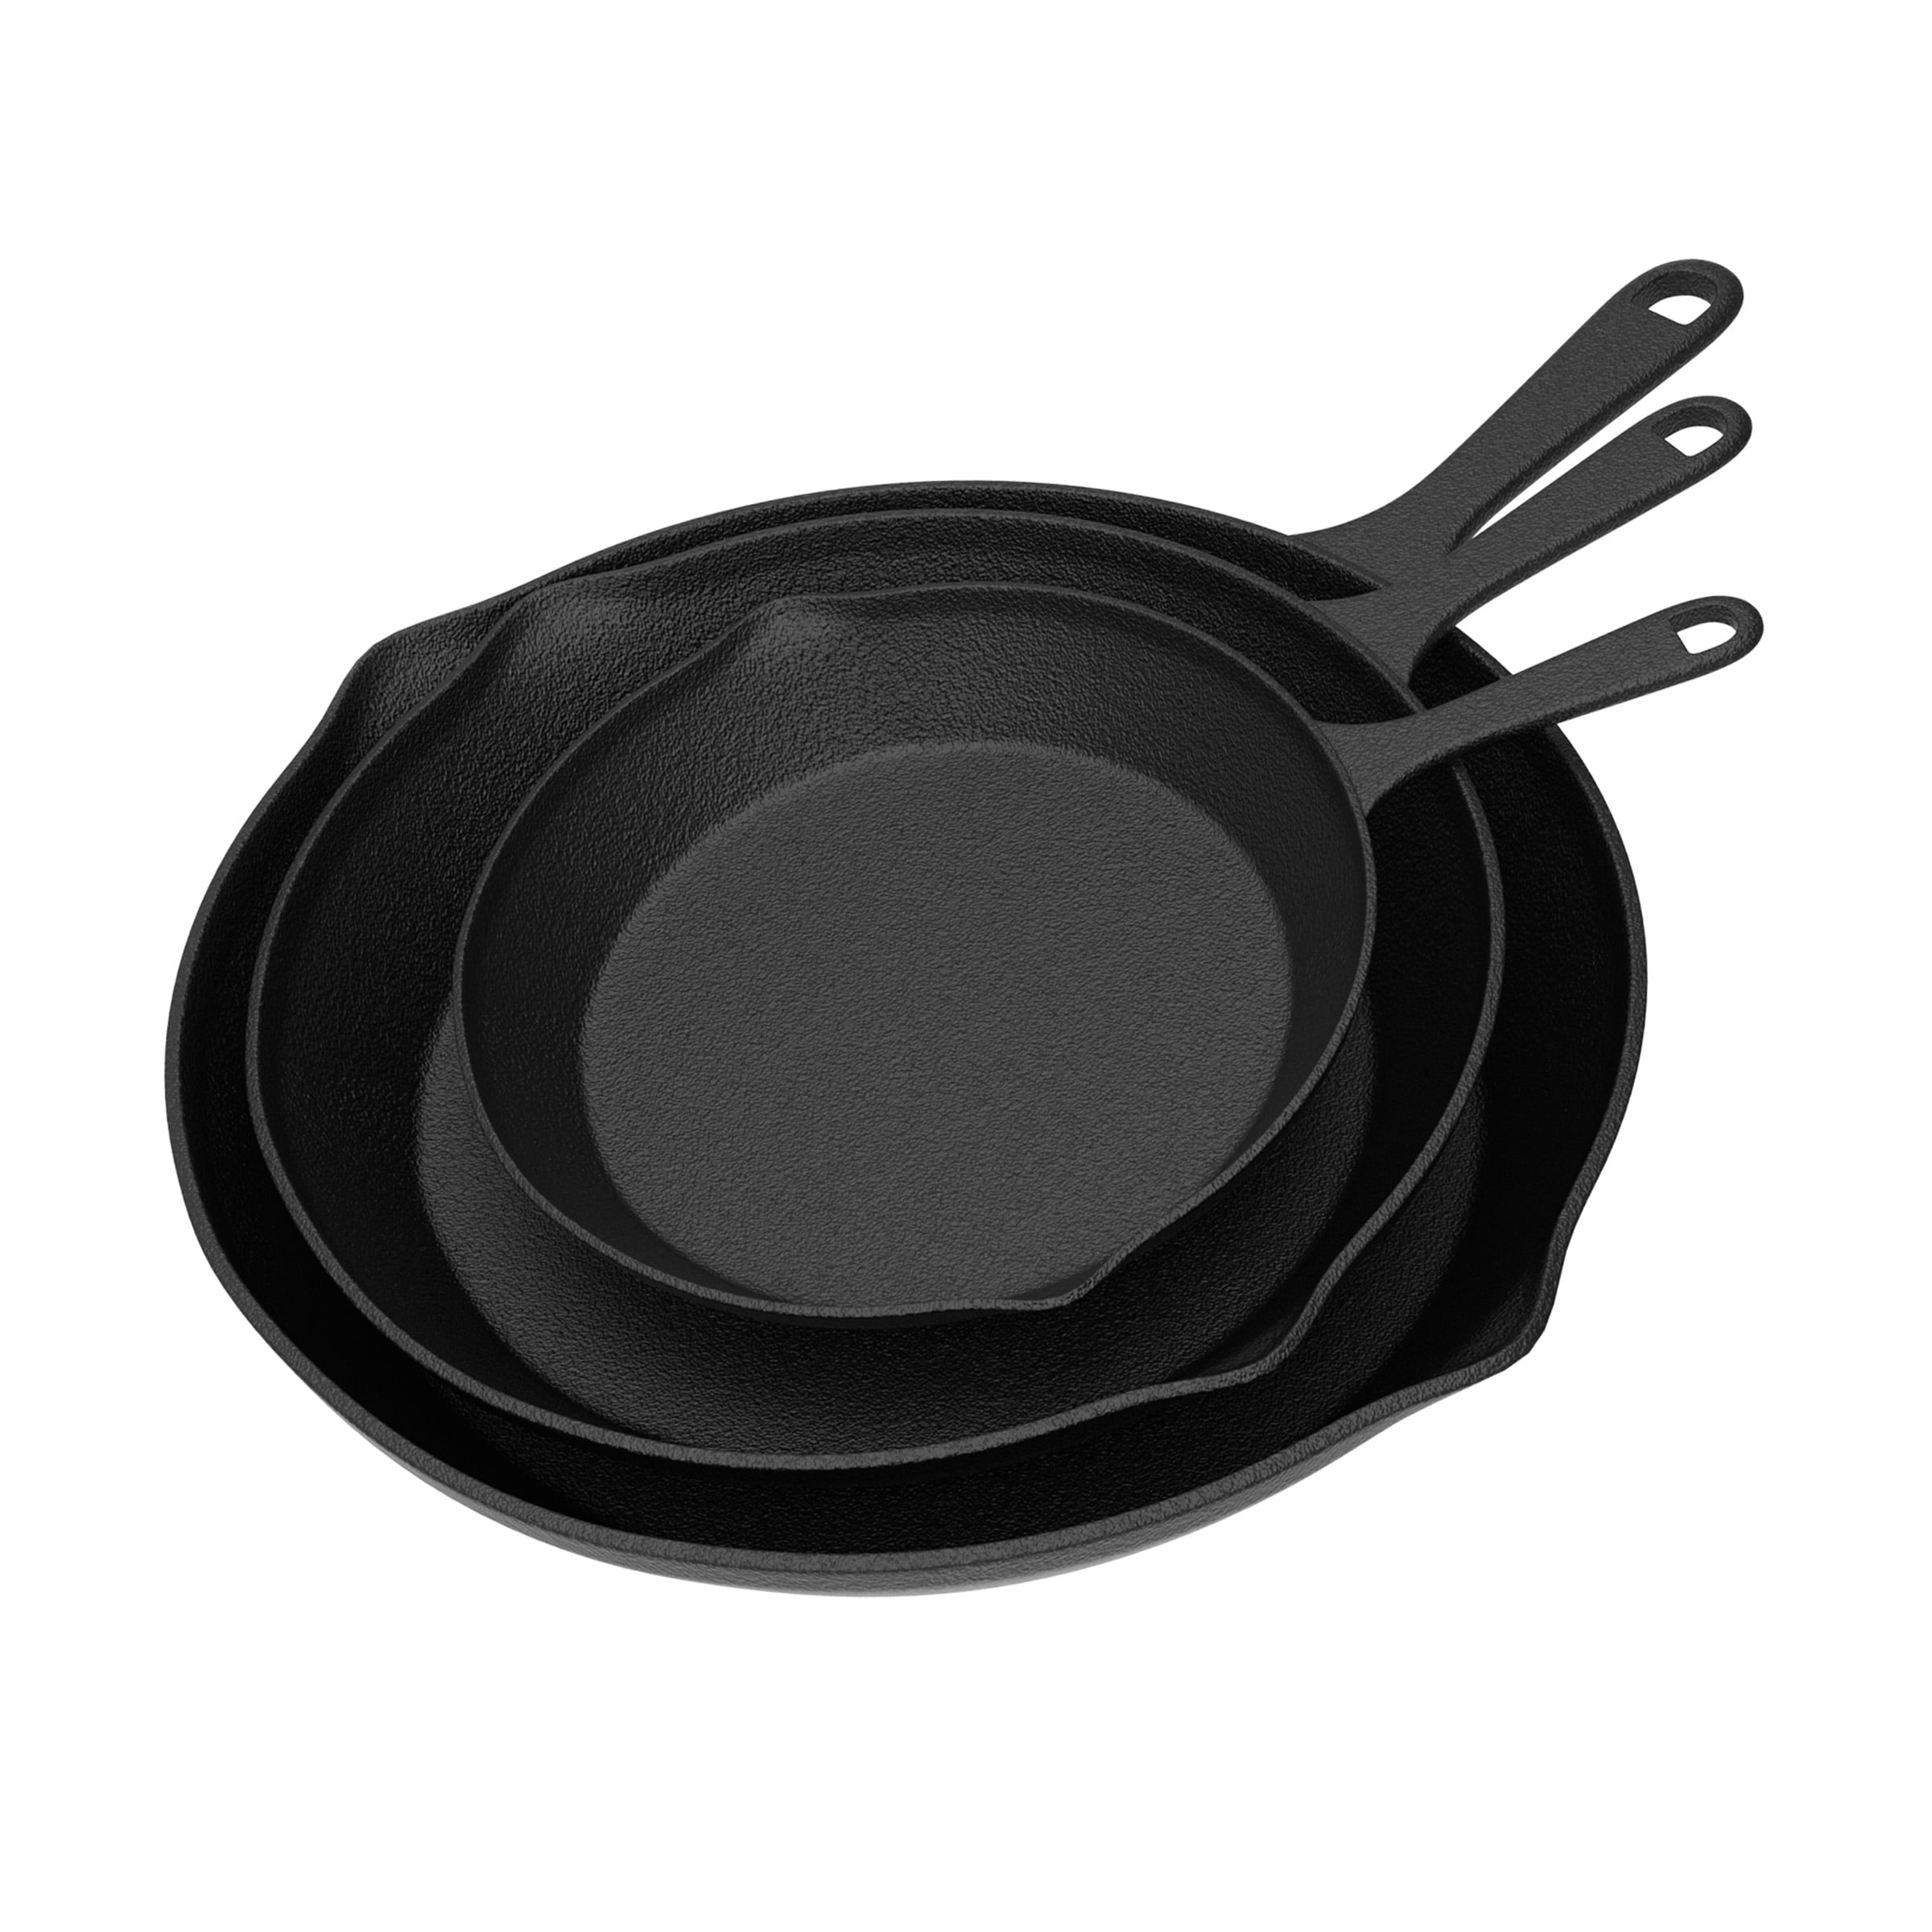 Eternal Living Cast Iron 3 Piece Skillet Set, Nonstick Pre-Seasoned  Chemical Free & Heavy Duty for Use on Stove Top, Oven or Grill 6 8” & 10”,  Black